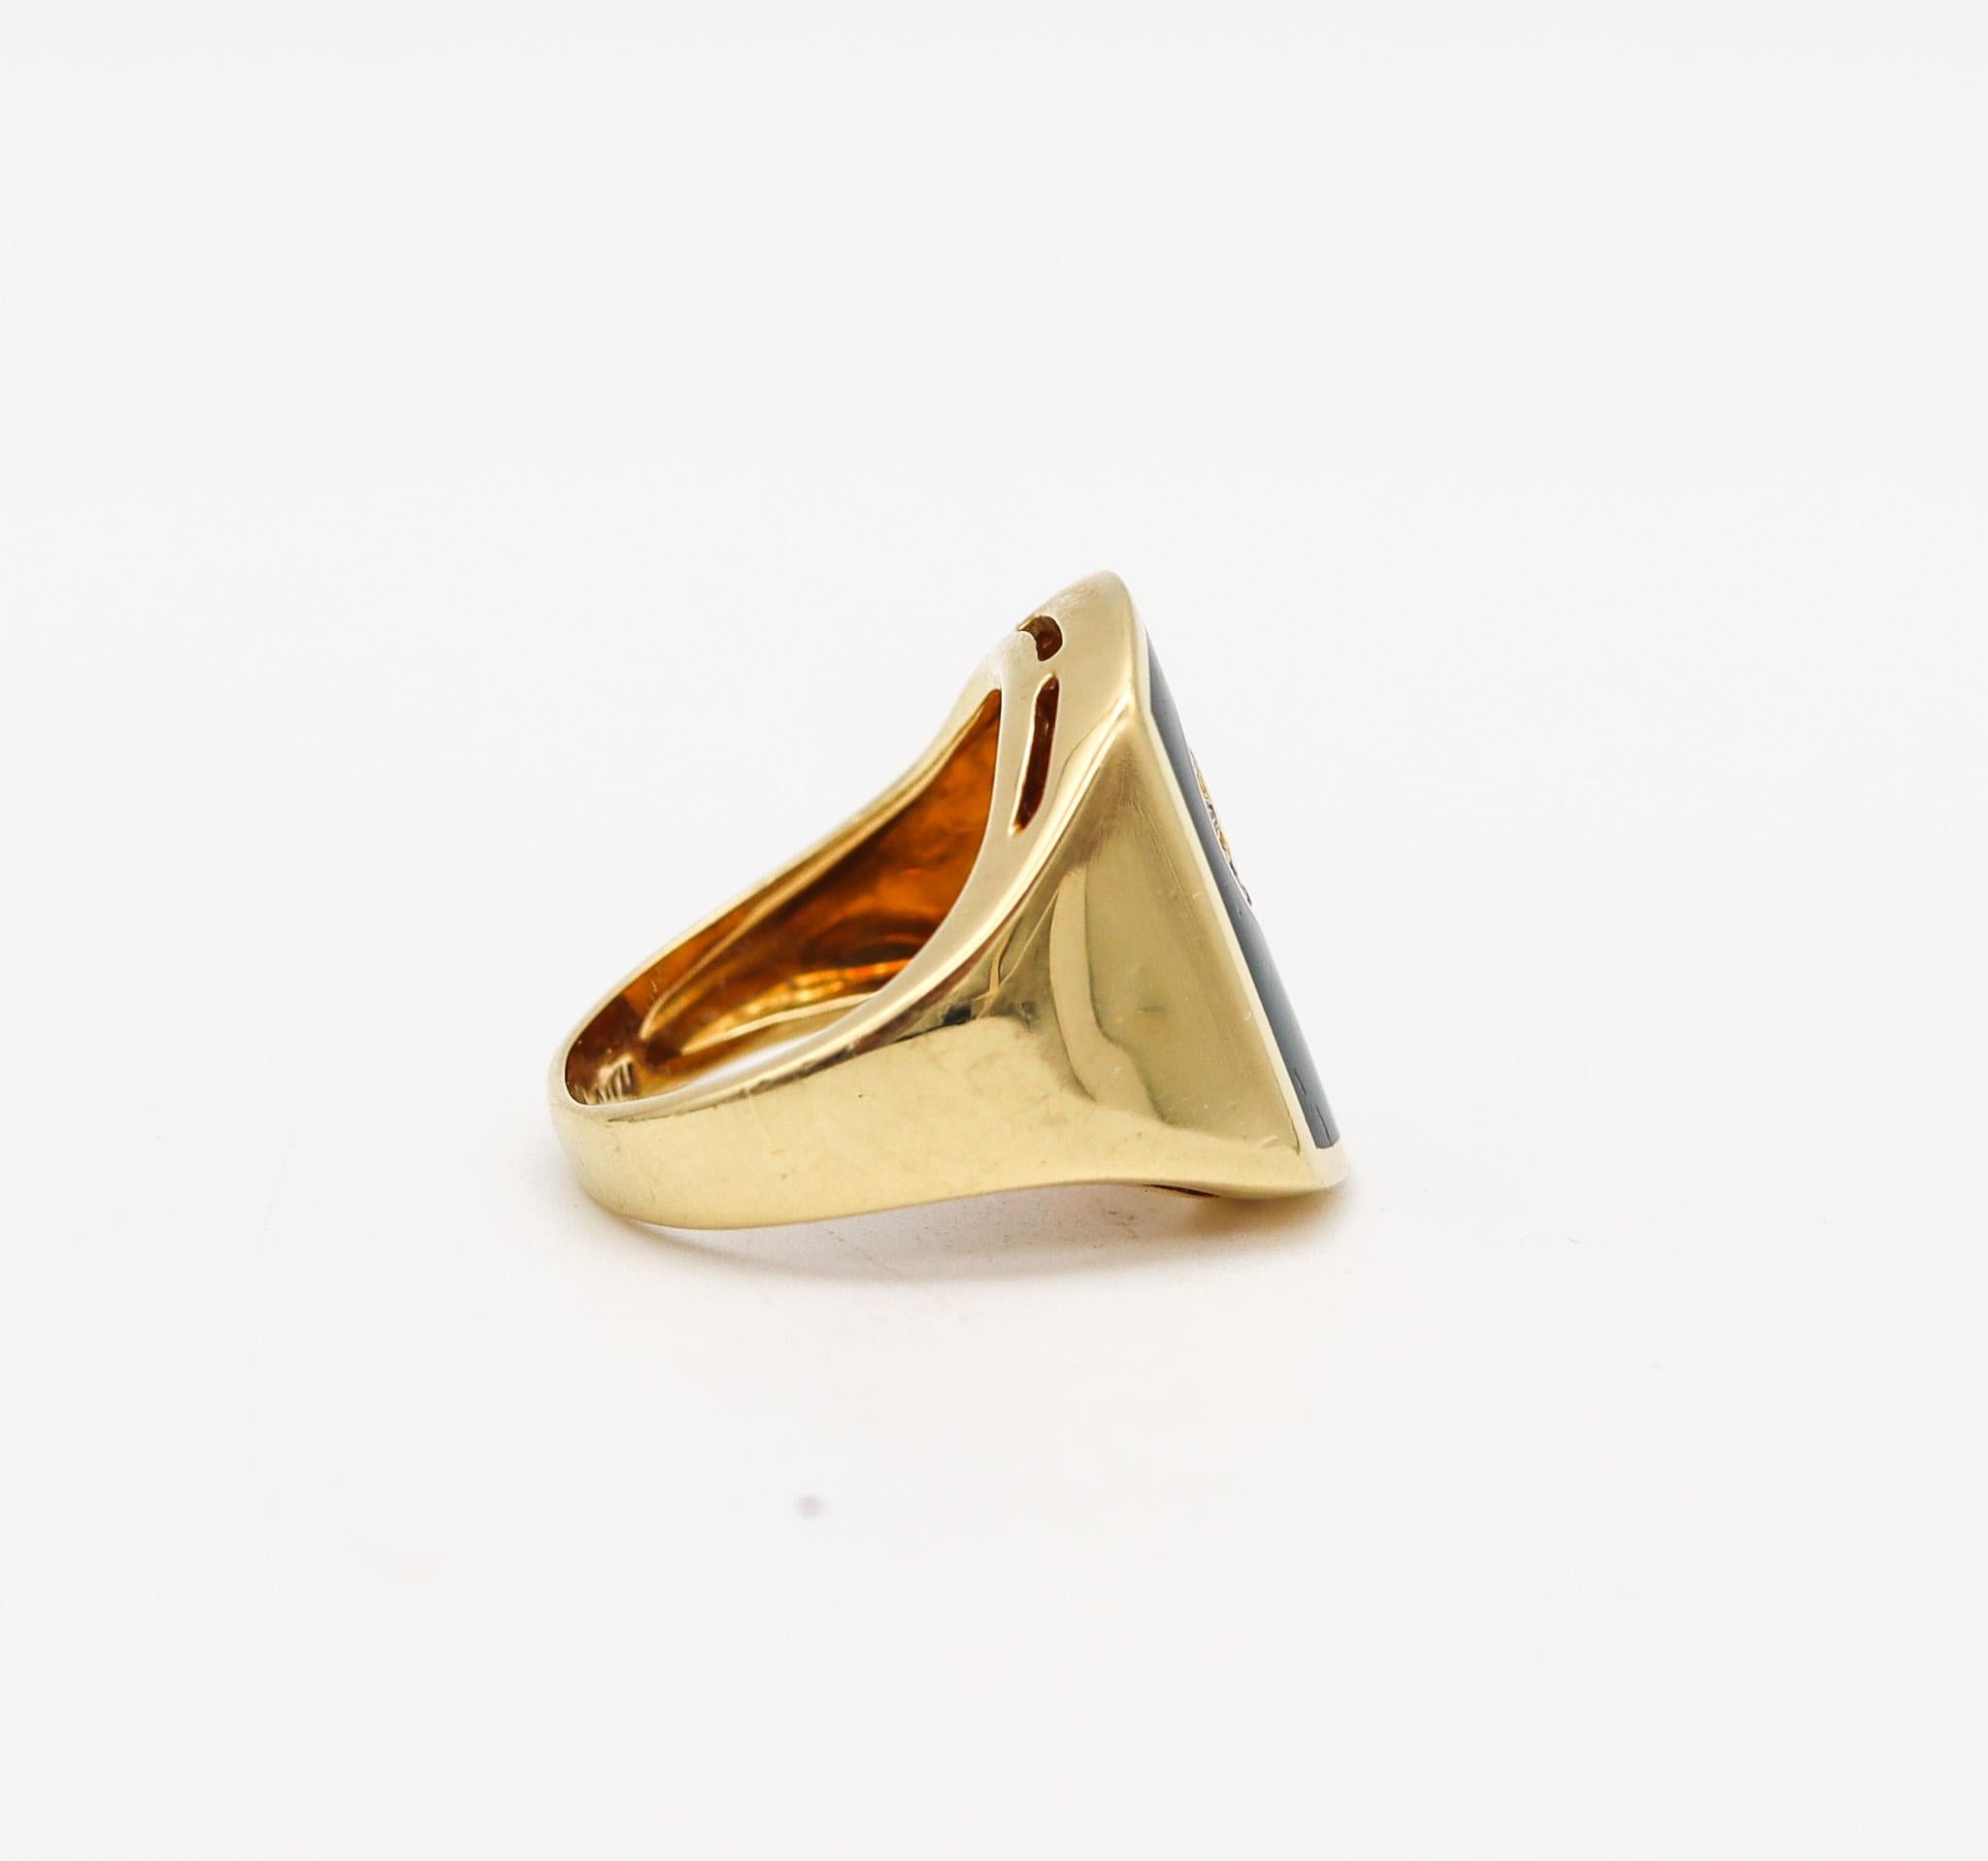 Cartier 1970 Modernist Enameled Signet Ring in 18 Karat Gold with Diamonds In Excellent Condition For Sale In Miami, FL